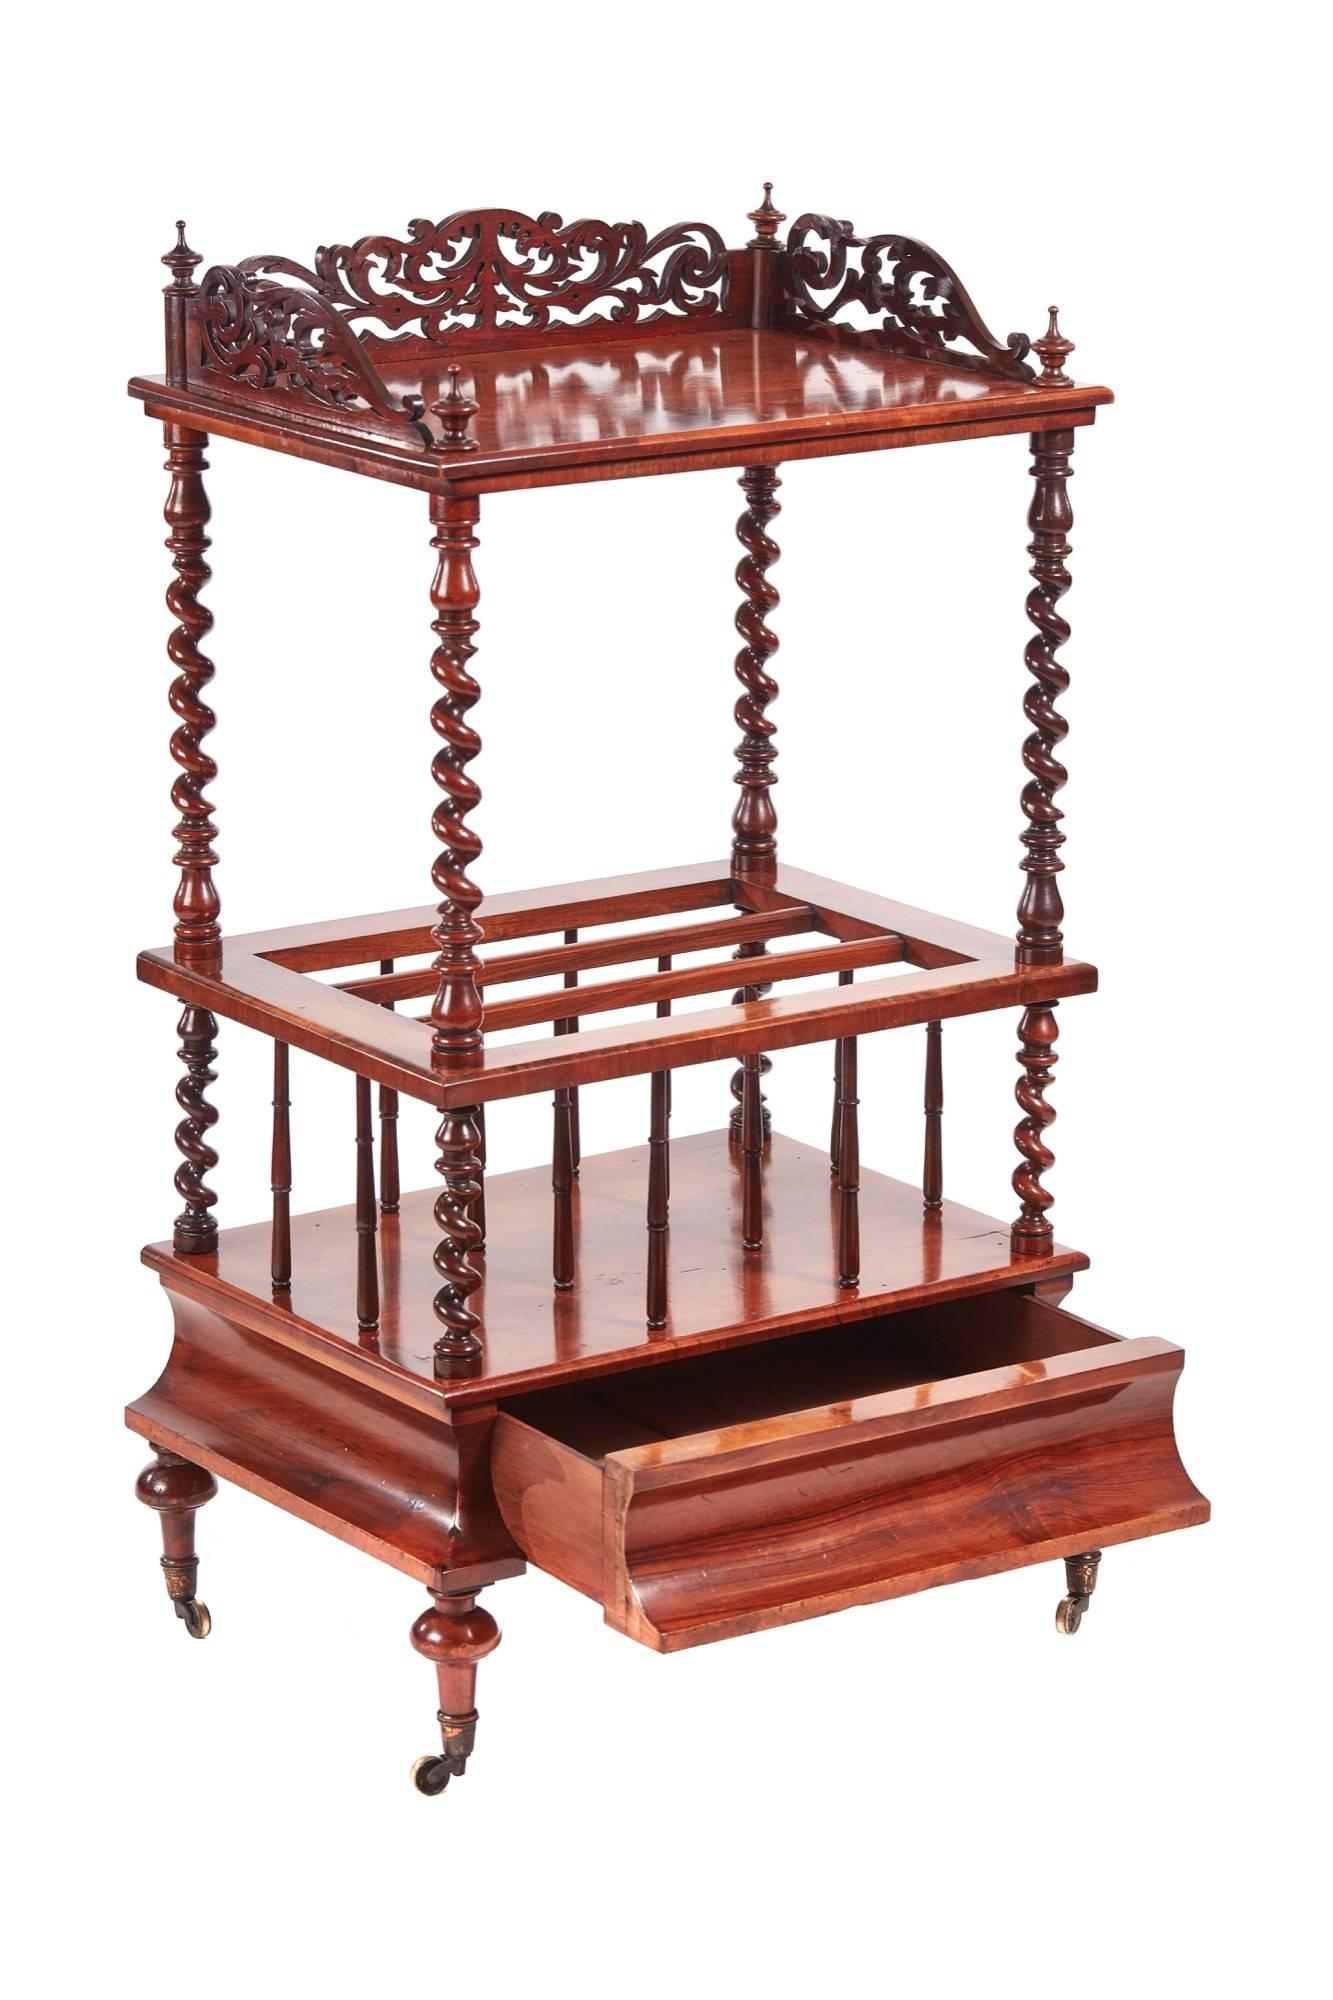 Victorian burr walnut canterbury whatnot, with a shaped fretwork gallery, lovely burr walnut top, solid walnut barley twist supports, three divisions supported by lovely turnings, one walnut shaped drawer to the base standing on short turned legs